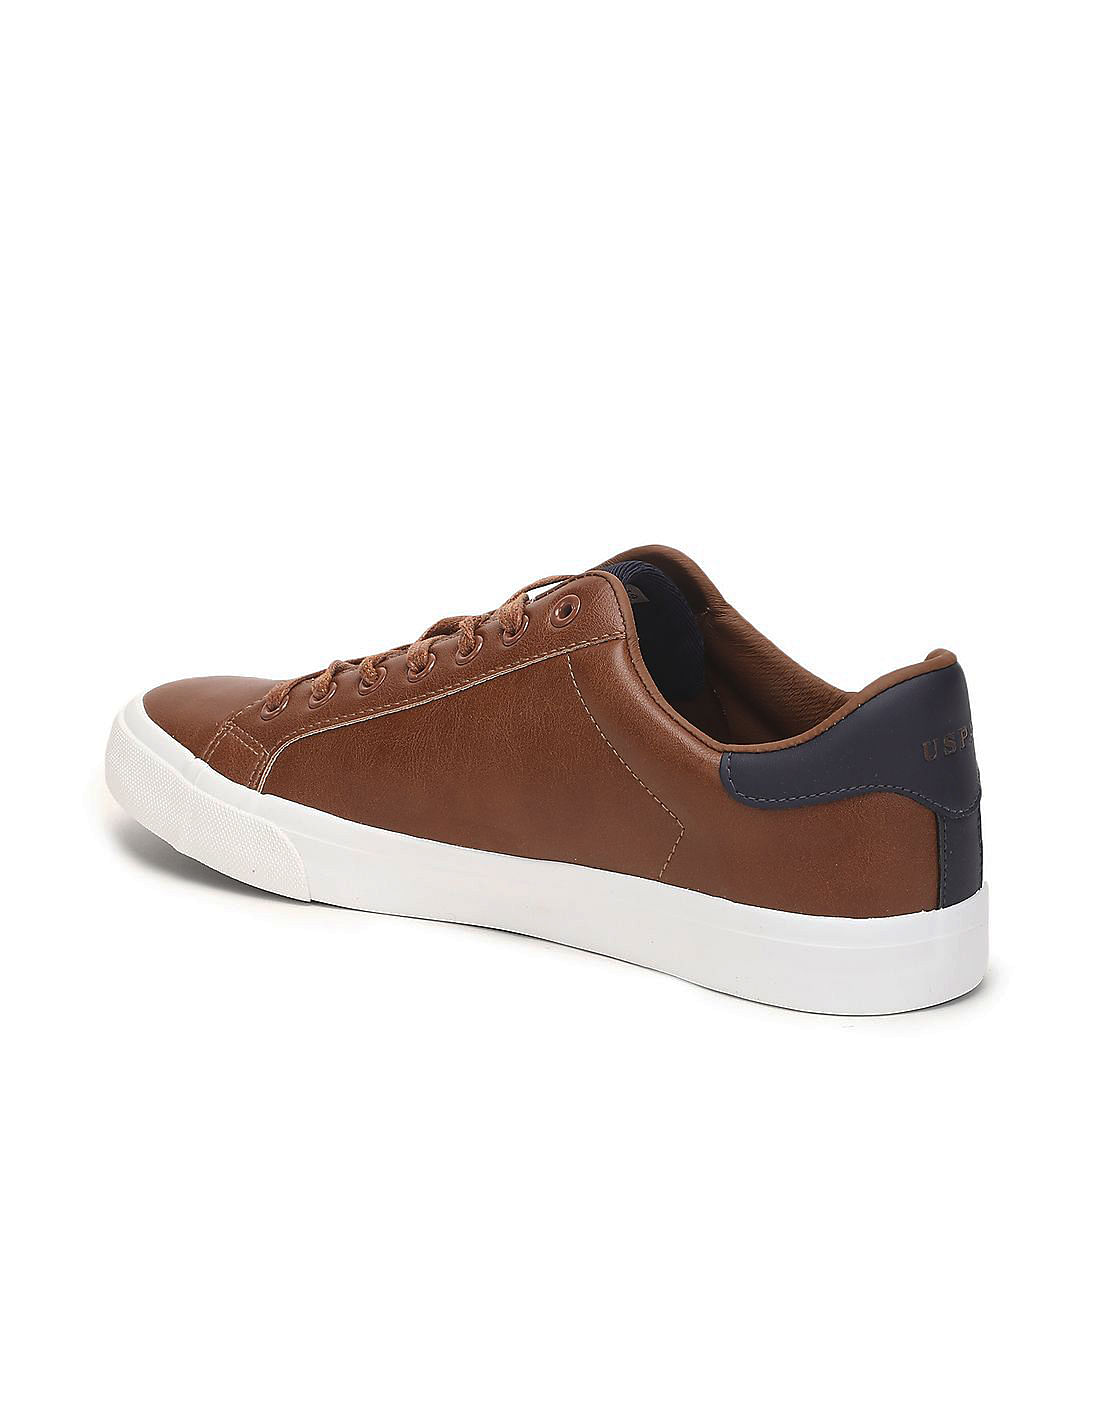 Buy Leather Sneakers for Men | Pikolinos Official Online Store